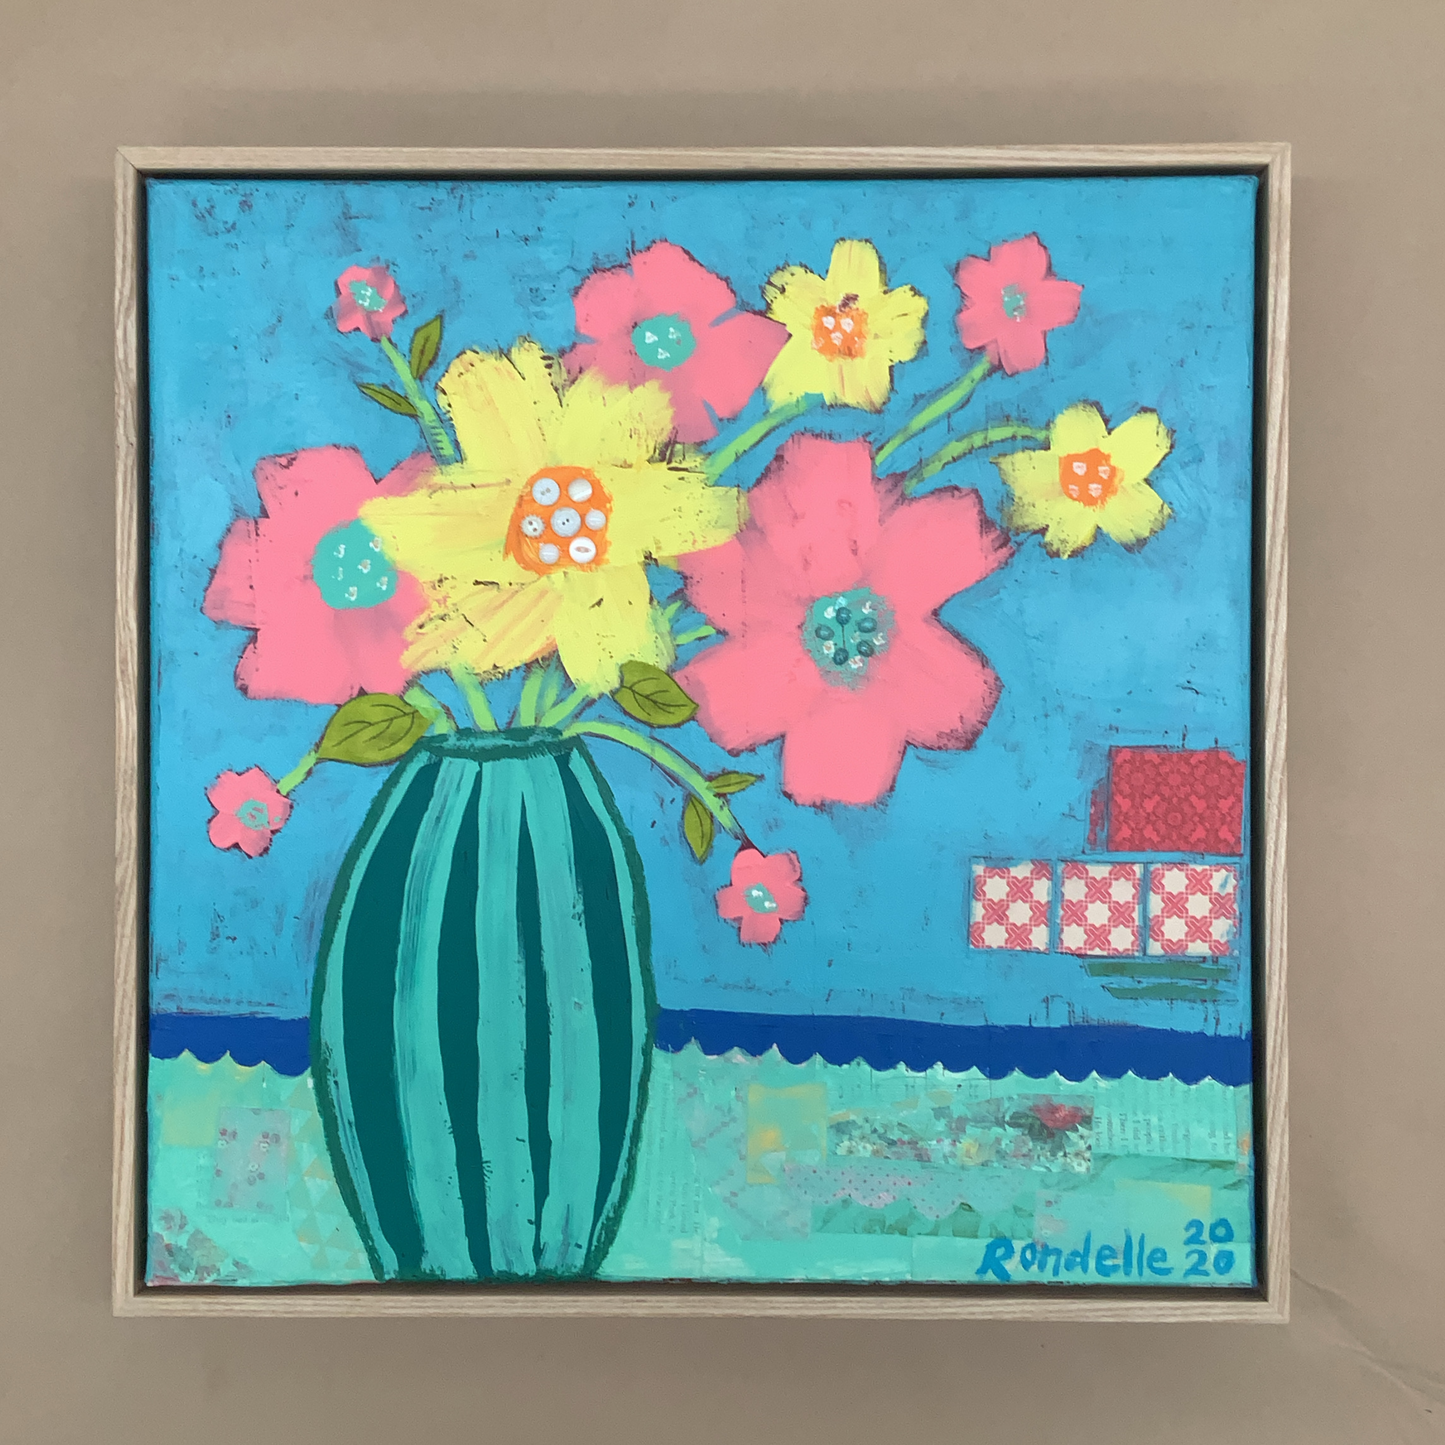 Happy Flowers - Framed Original Acrylic and mixed media Painting on Canvas